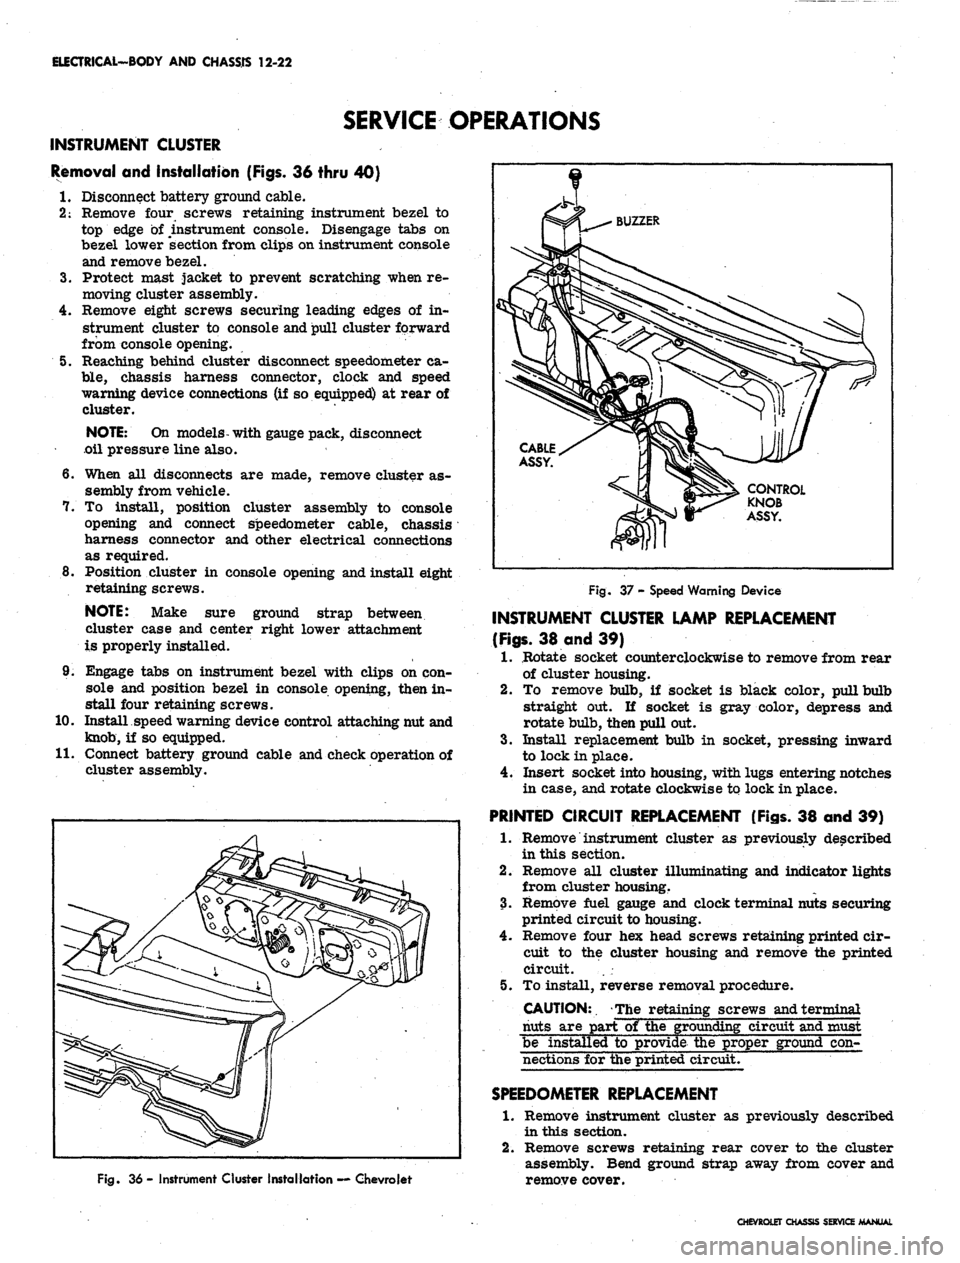 CHEVROLET CAMARO 1967 1.G Chassis Workshop Manual 
ELECTRICAL-BODY AND CHASSIS 12-22

SERVICE OPERATIONS

INSTRUMENT CLUSTER

Removal and Installation (Figs. 36 thru 40)

I. Disconnect battery ground cable.

2:
 Remove four screws retaining instrumen